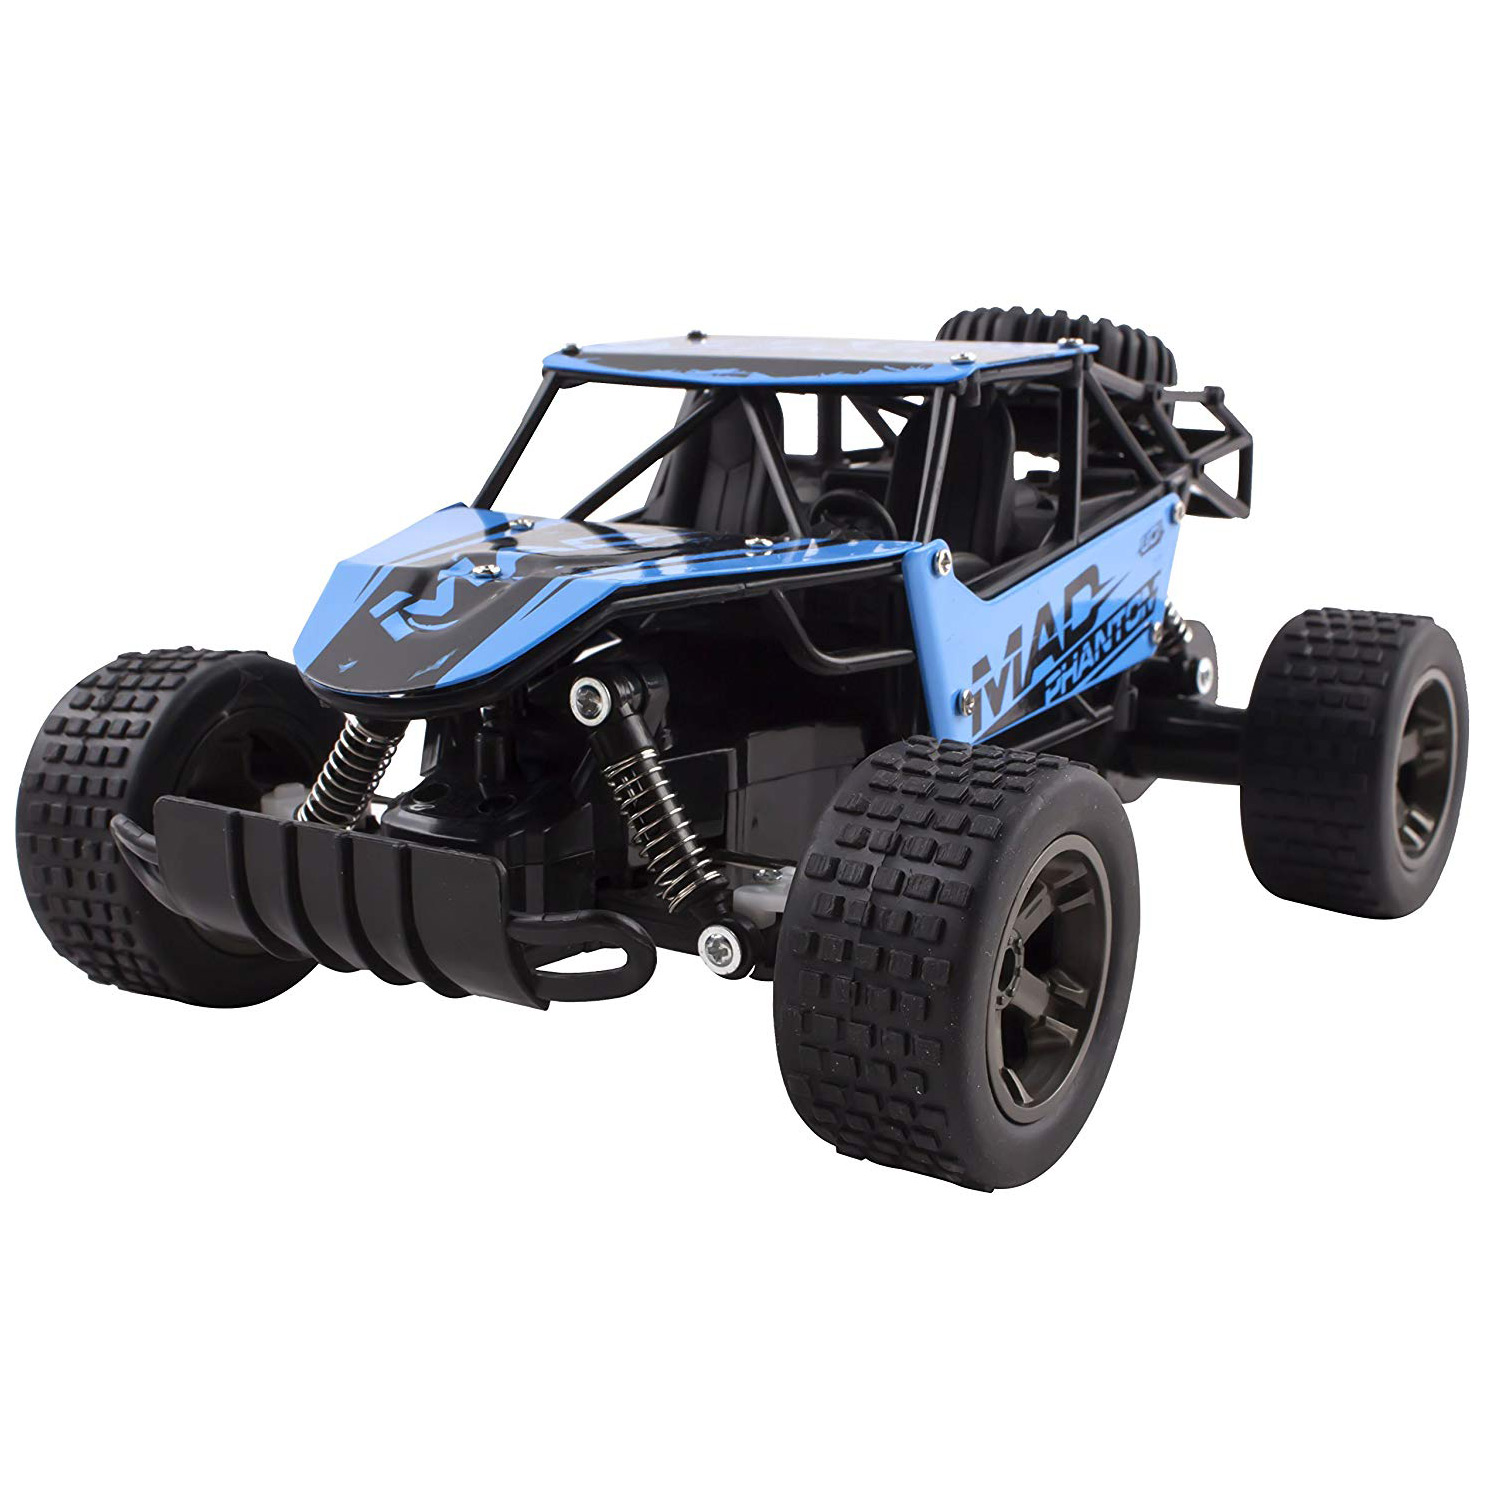 RC Truck 2.4 GHz Mad Turbo King Cheetah Diecast Body Remote Control Buggy Car 1:18 Scale RTR With Working Off-Road Suspension High Speed Radio Control Hobby Truggy Rechargeable Battery Included (Blue)